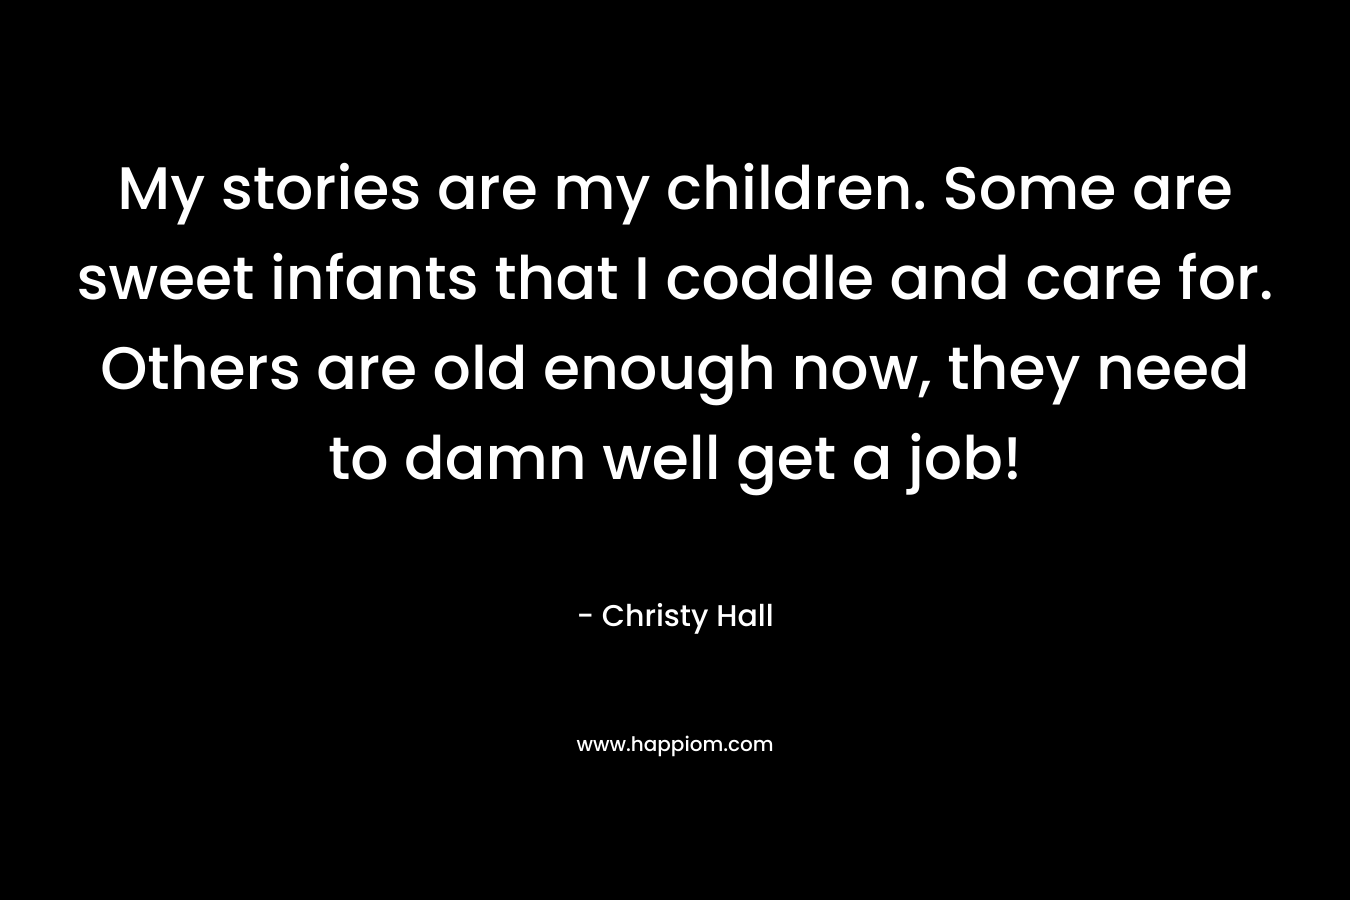 My stories are my children. Some are sweet infants that I coddle and care for. Others are old enough now, they need to damn well get a job! – Christy  Hall